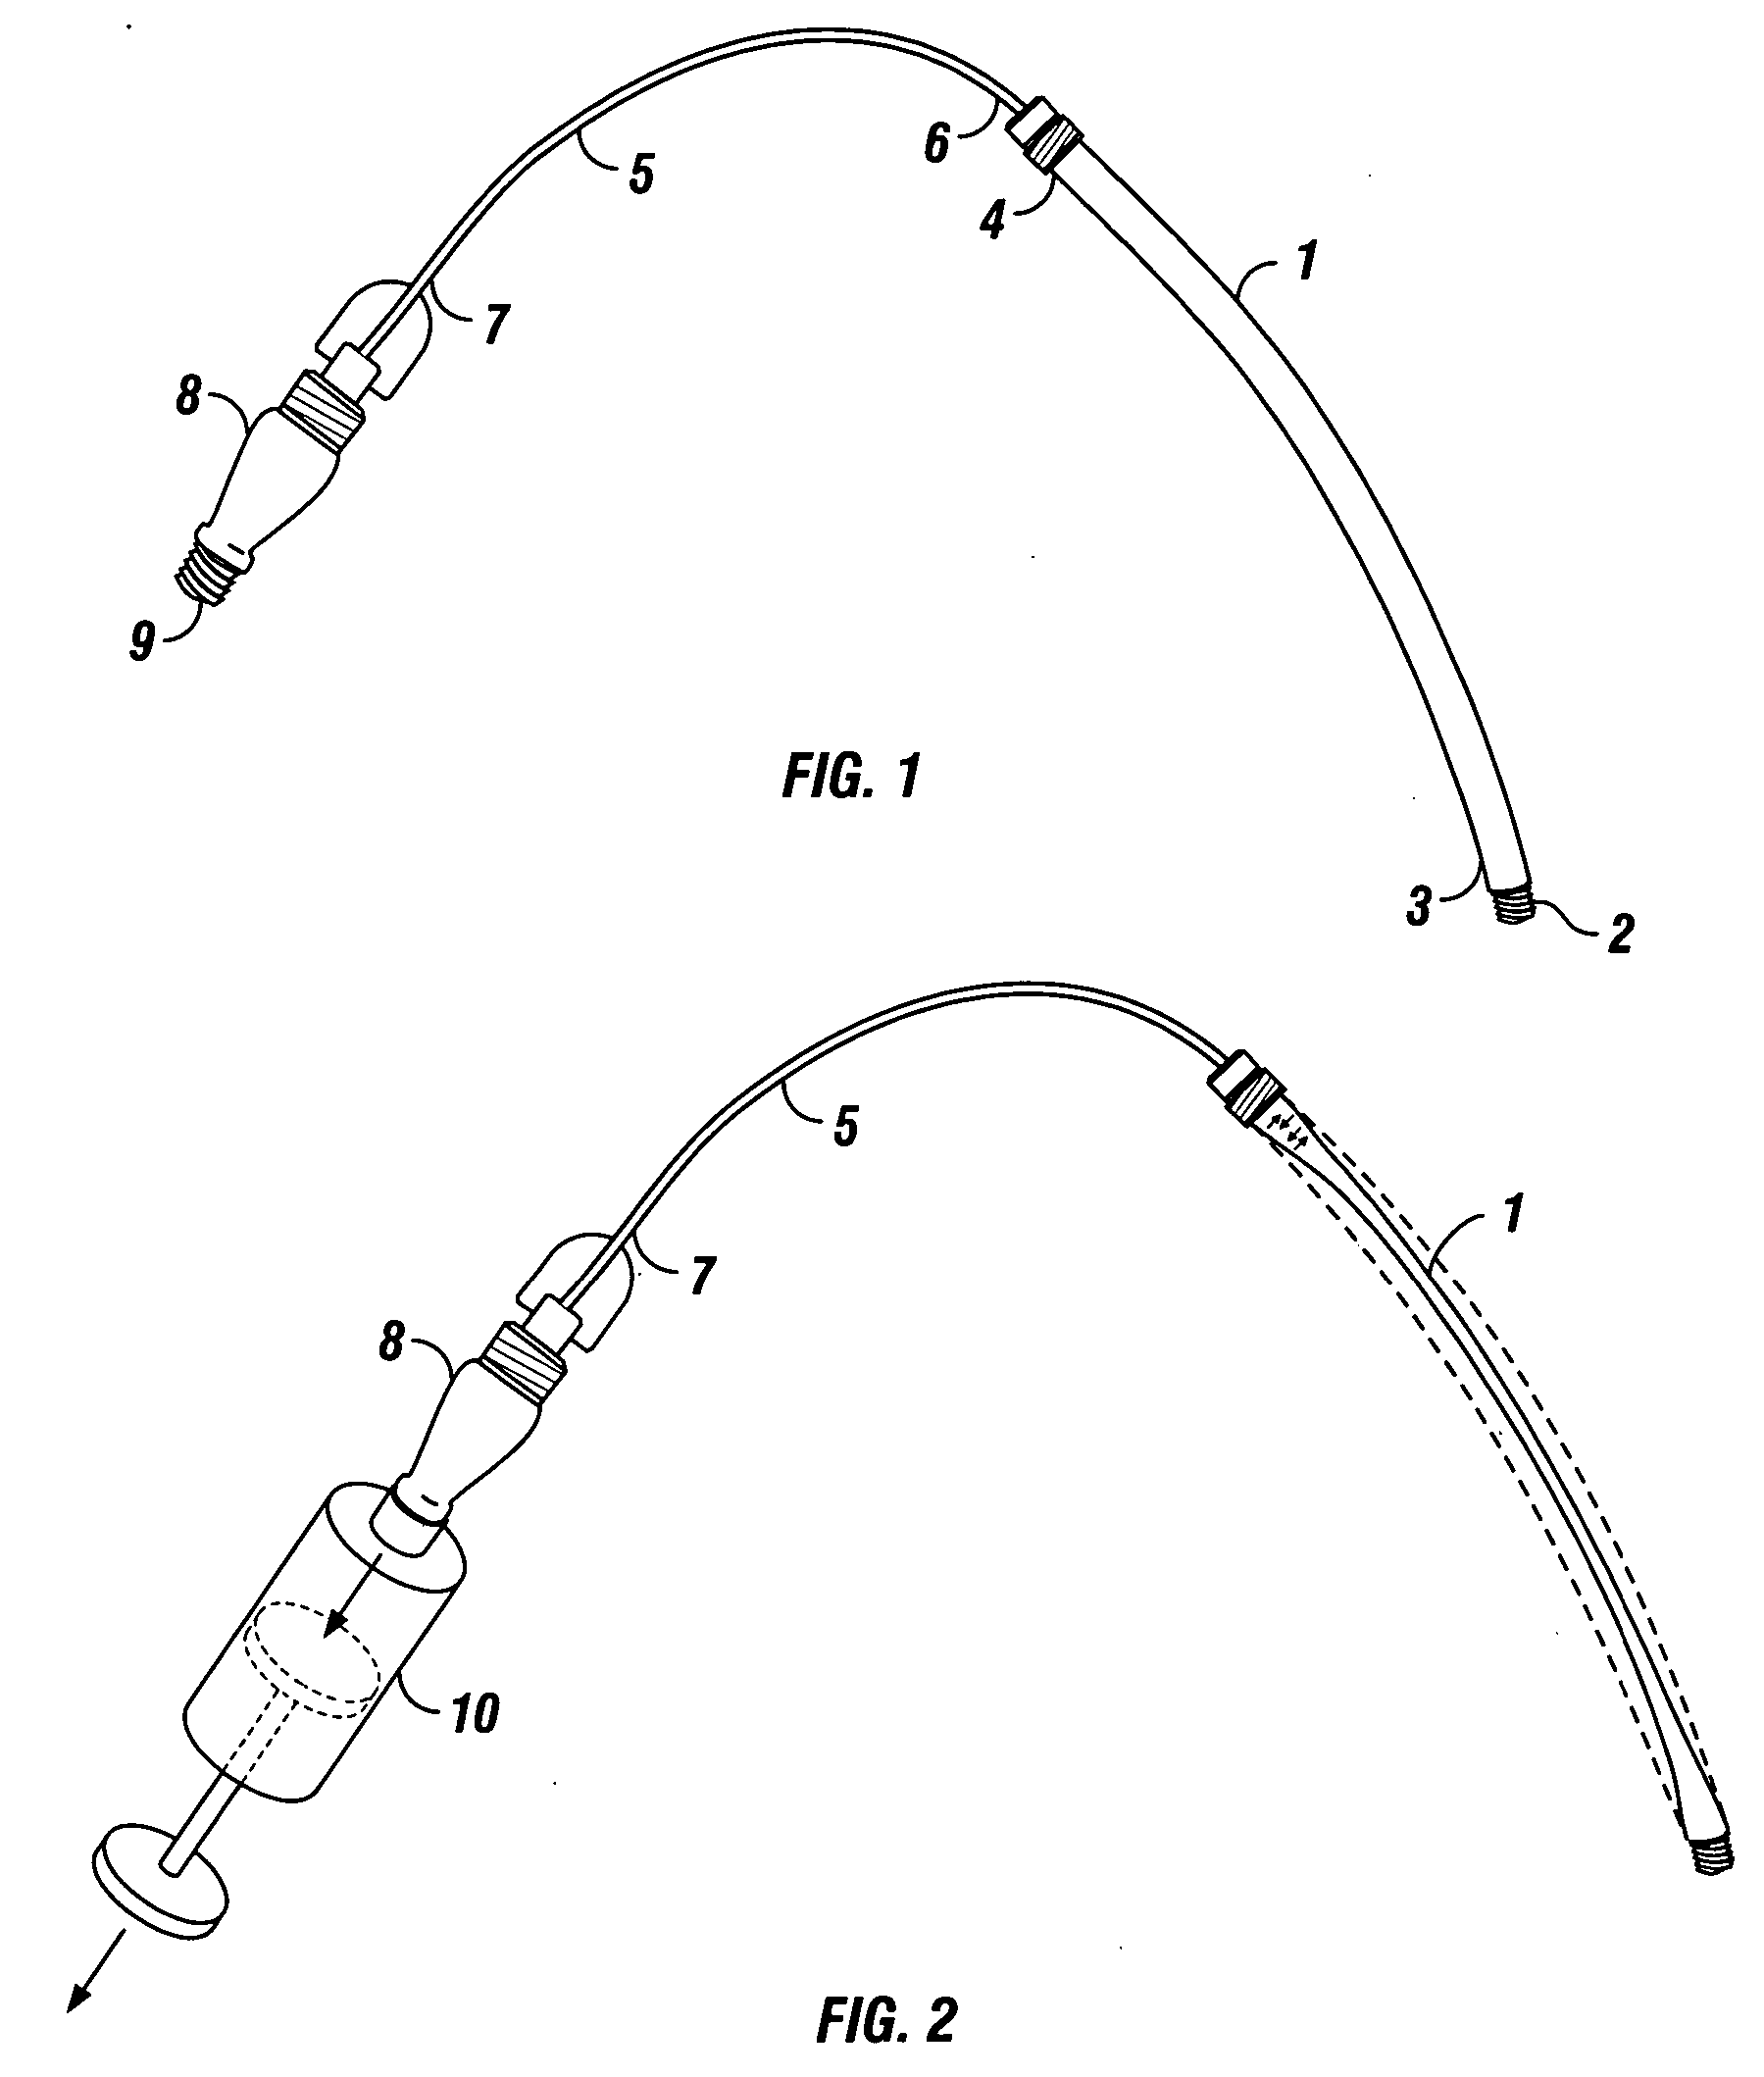 Ultrasound guided vascular access training device